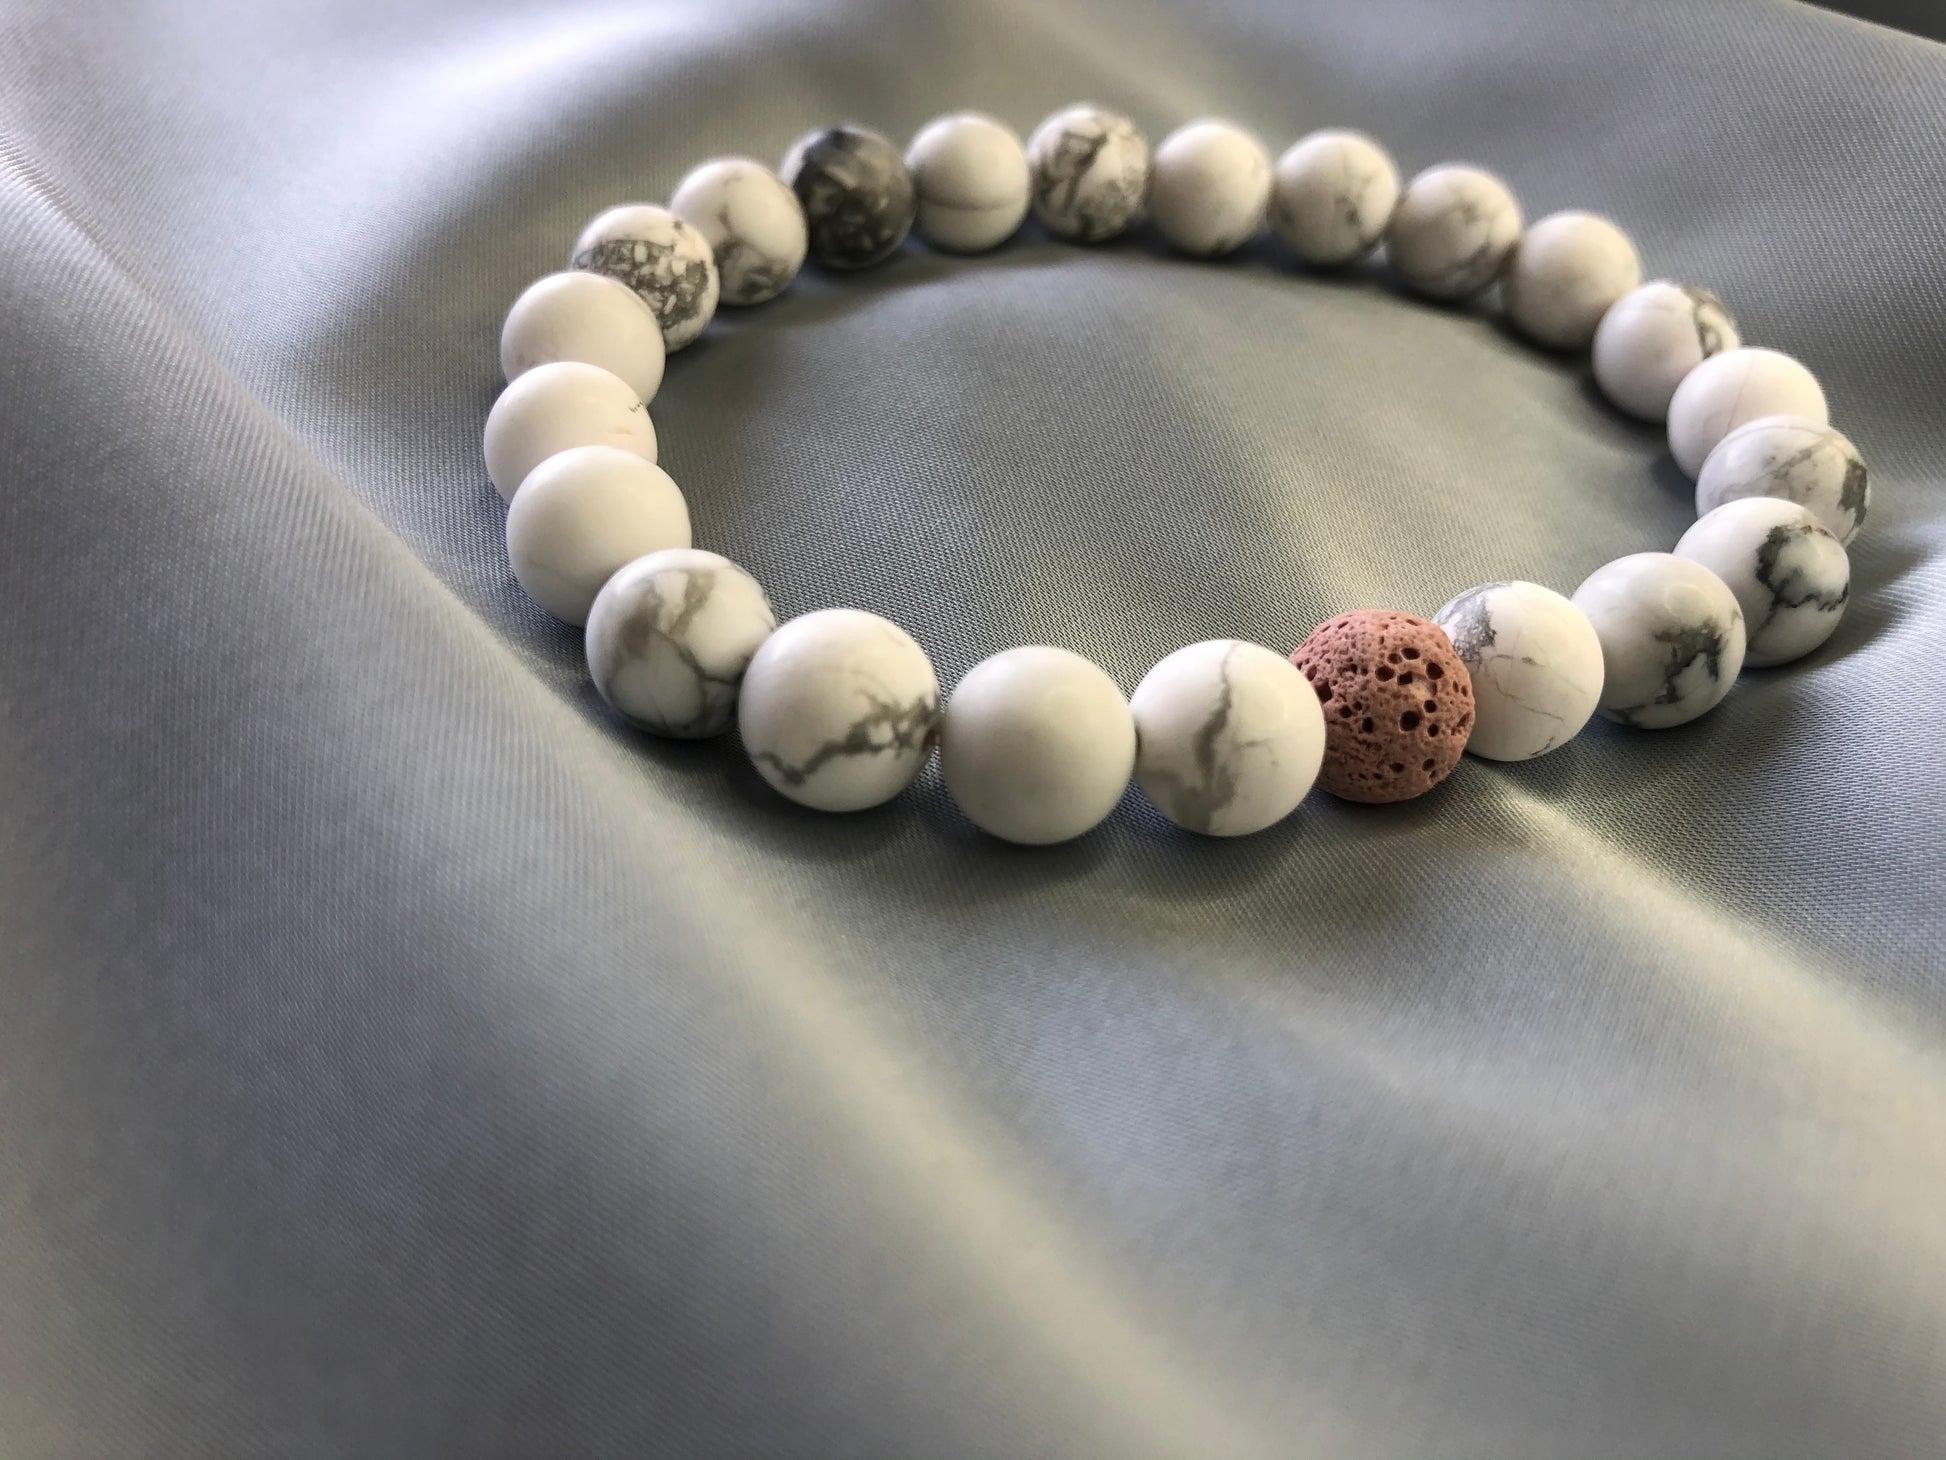 ASW Serene Oil Diffusing Bracelet by Alive Intentions + Olfactory Sensory Wellness 08